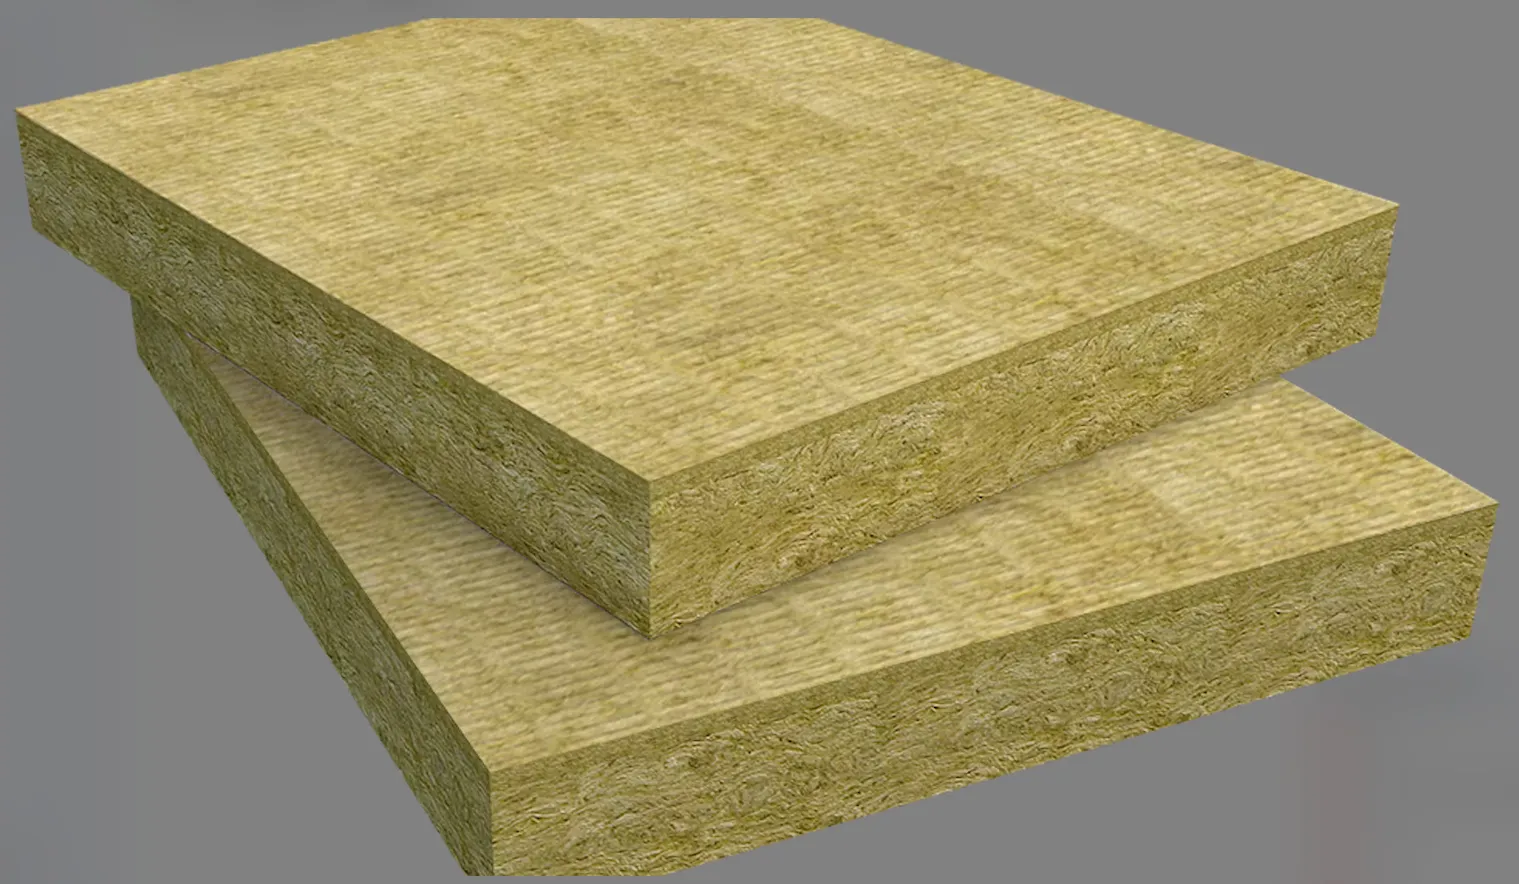 Stone wool for building insulation